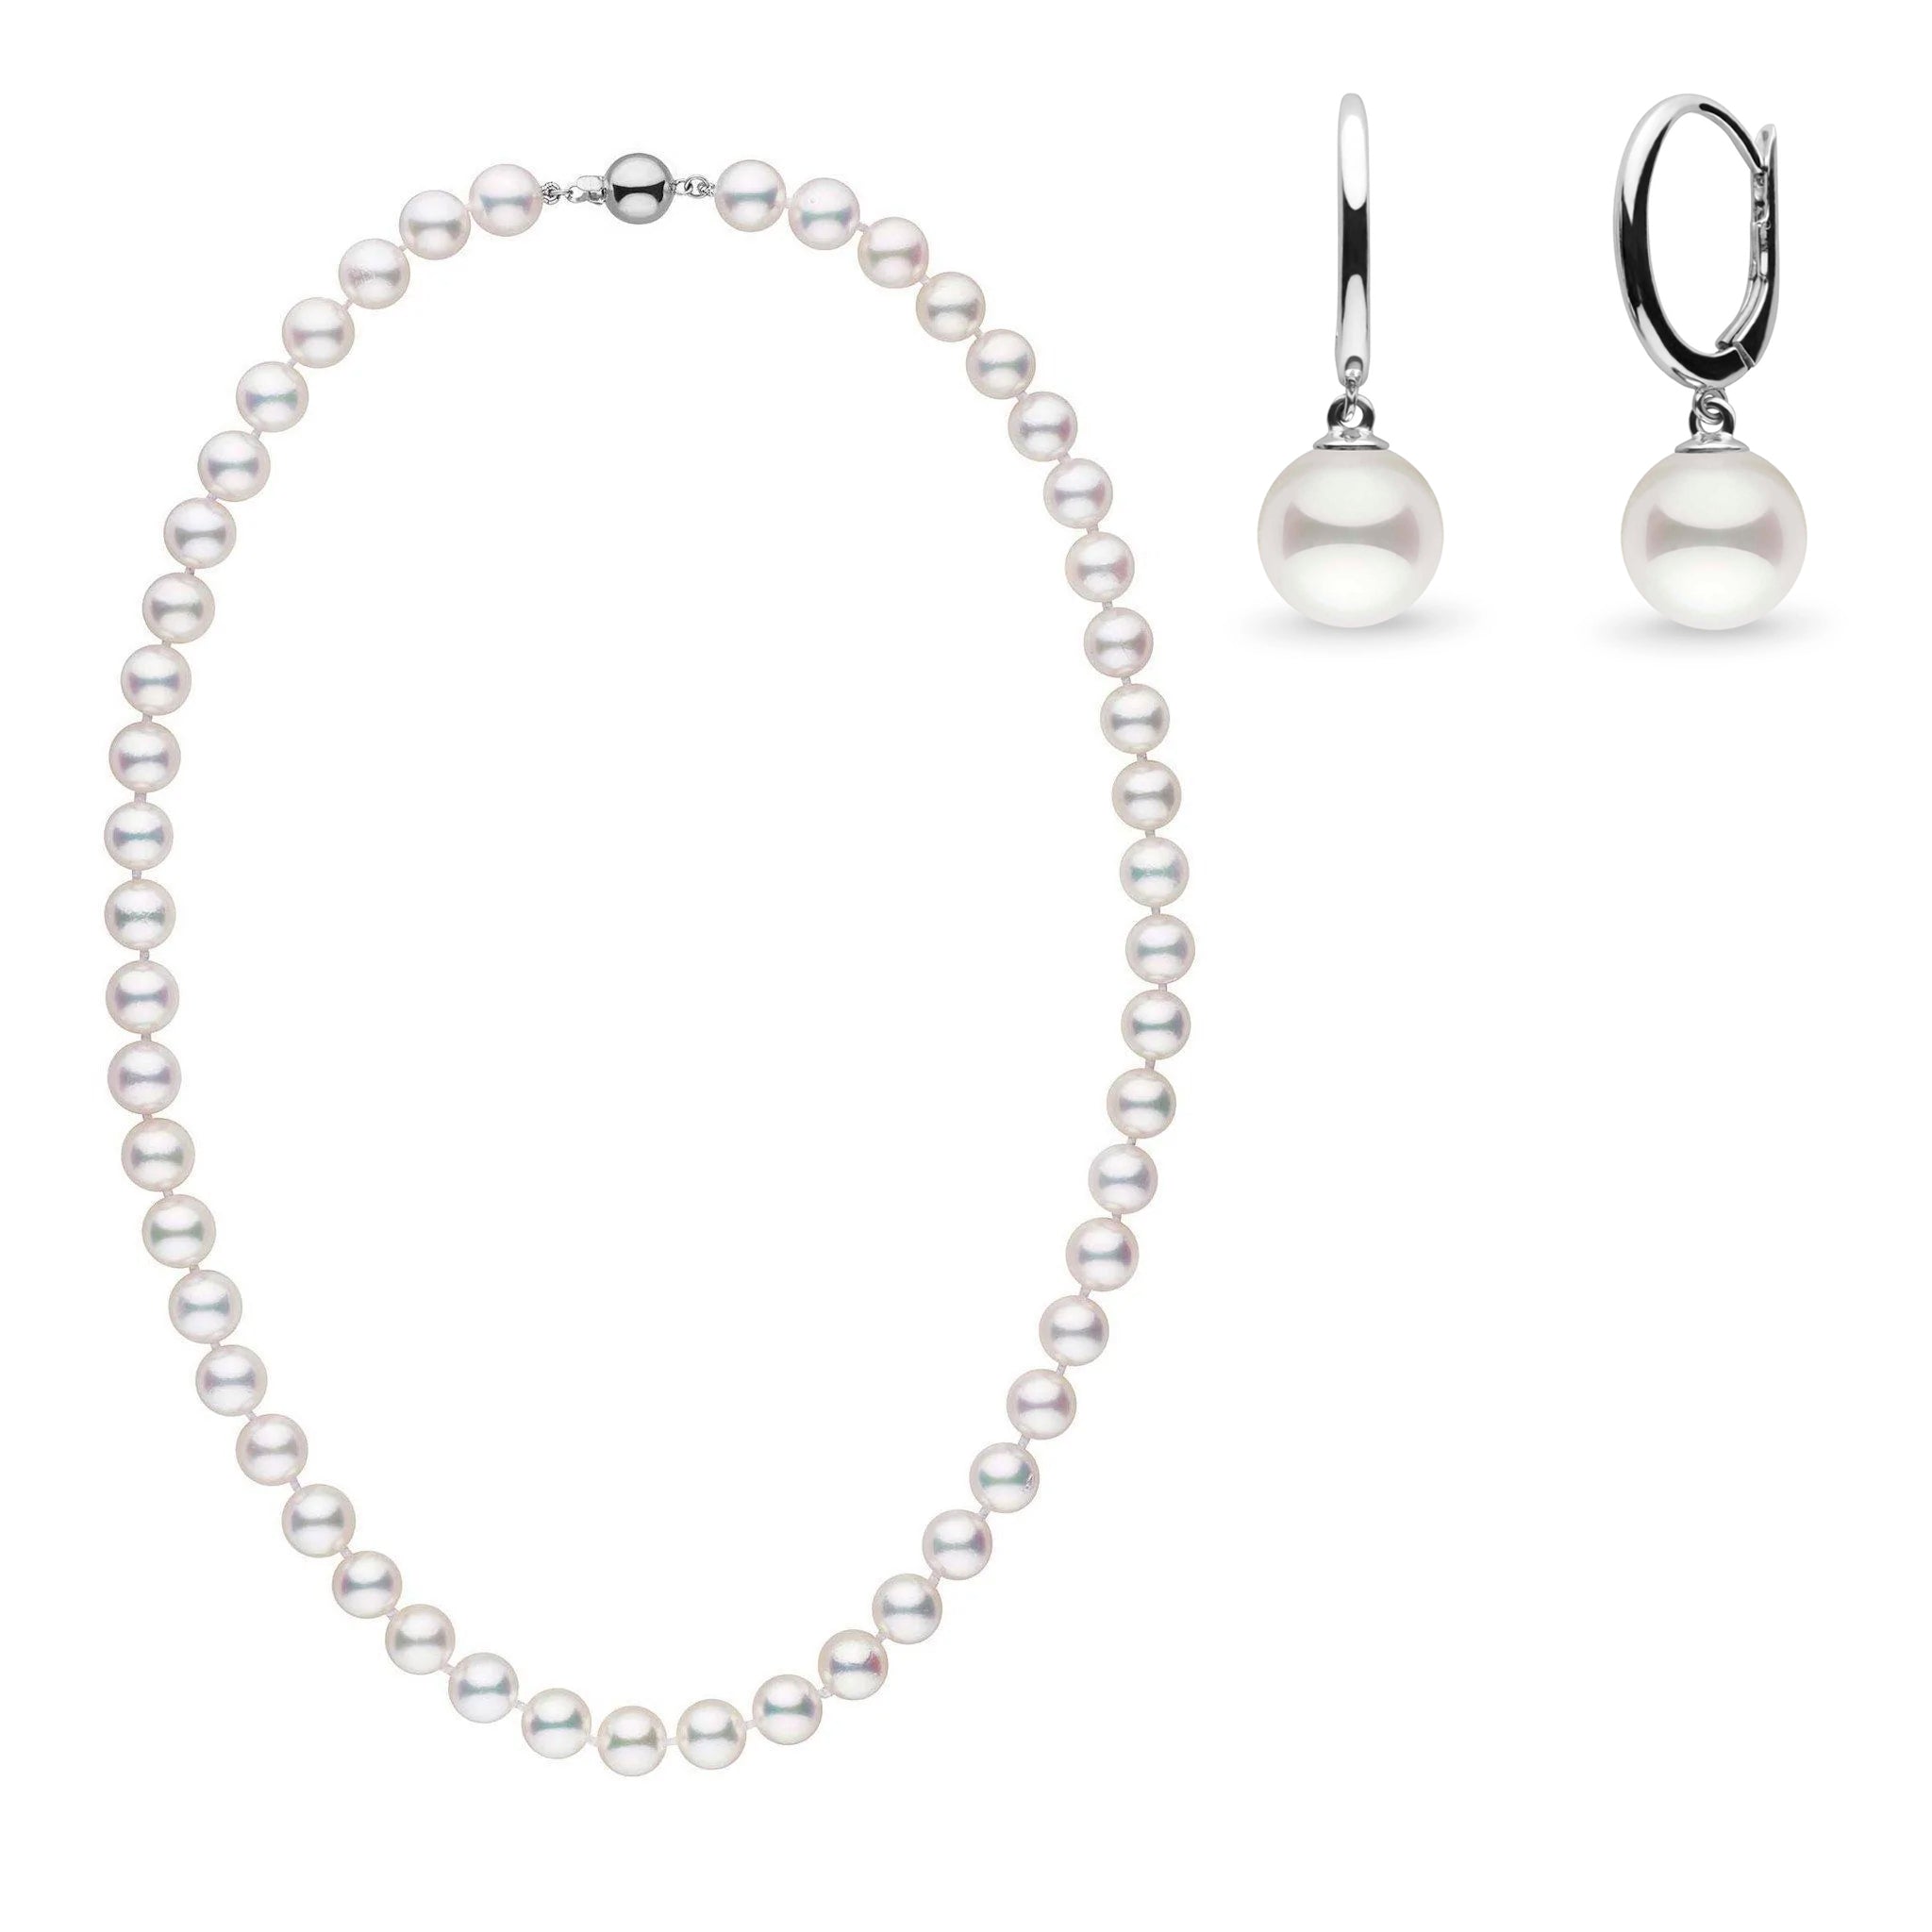 7.0-7.5 mm AAA Akoya 18 Inch Pearl Necklace with Dangle Earrings White Gold